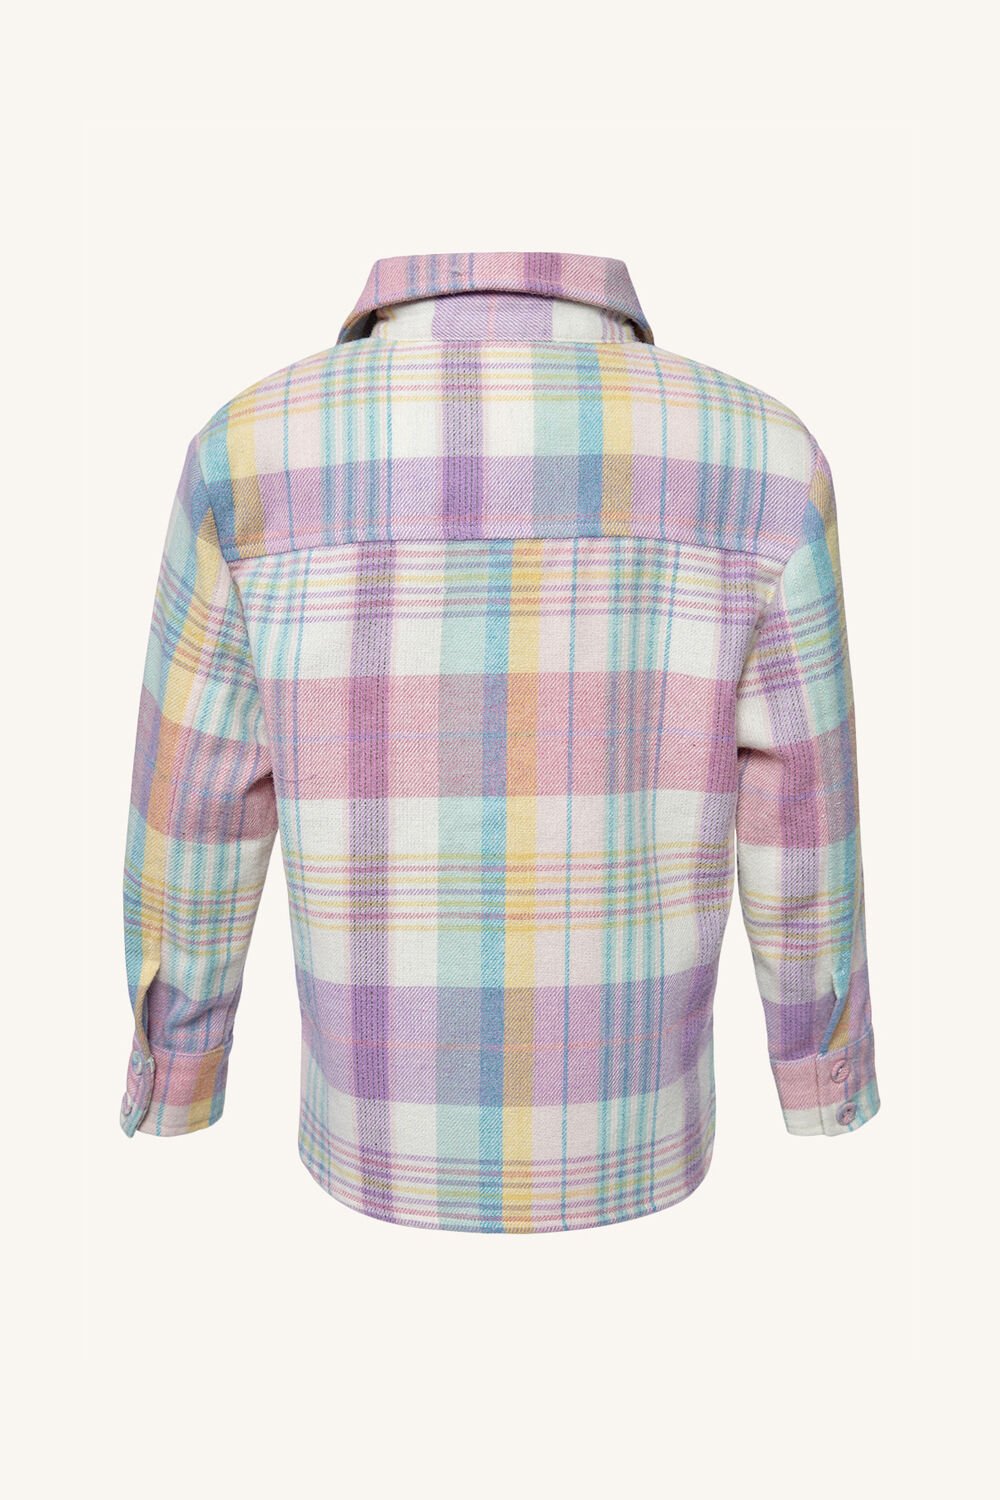 Girls CHECK OVERSIZED SHIRT in colour CANDY CHECK